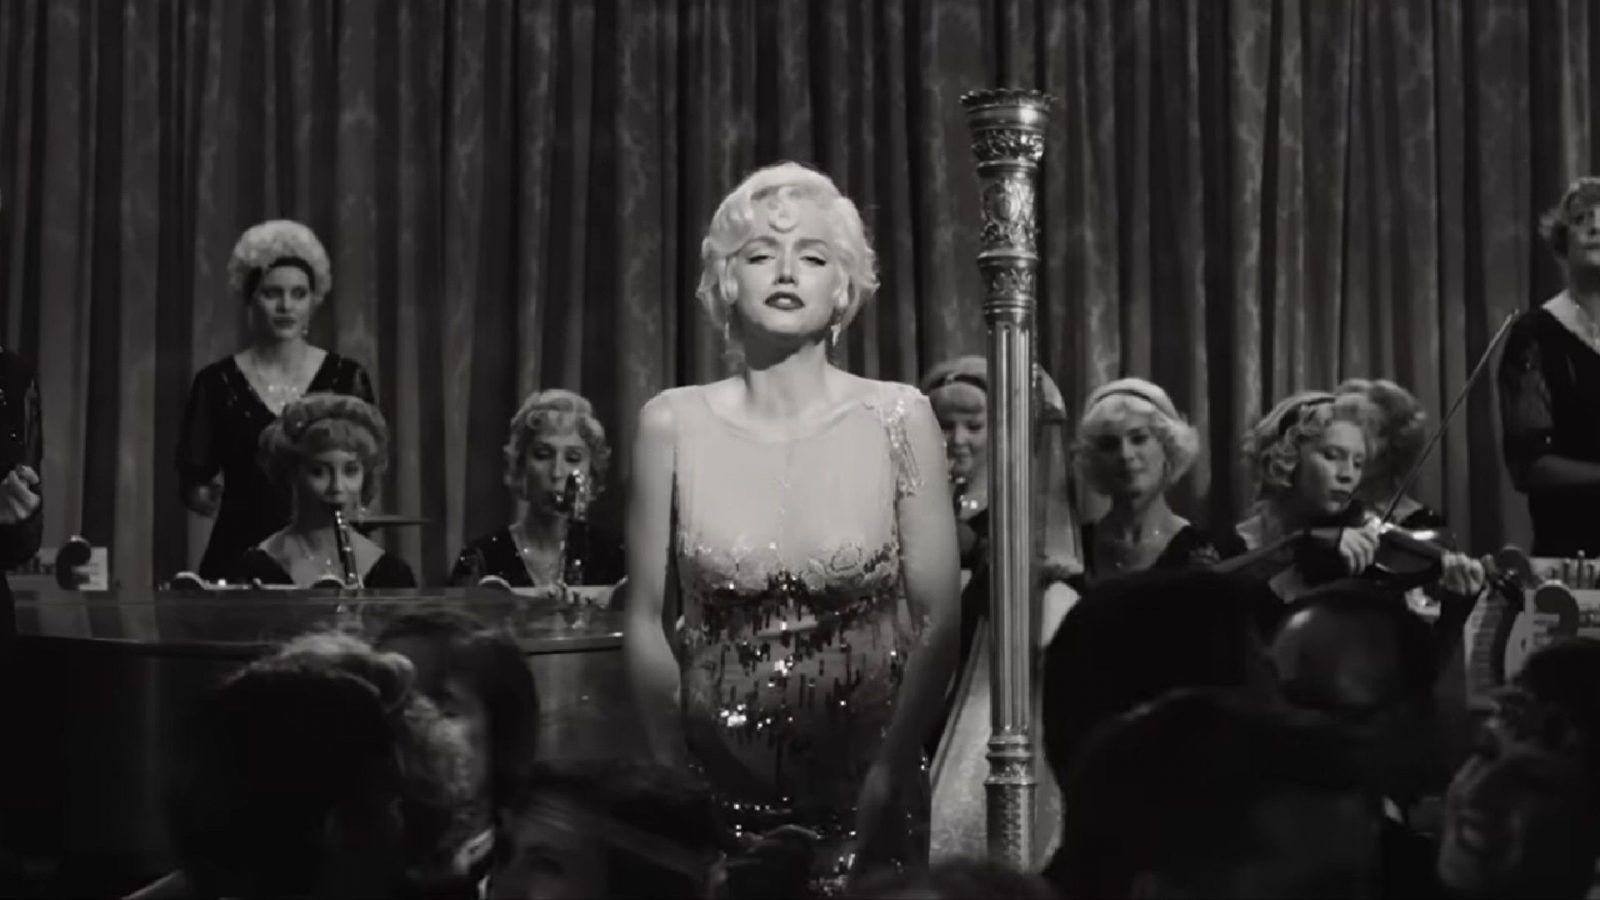 The first ‘Blonde’ trailer is here, and it shows a dark side to Marilyn Monroe